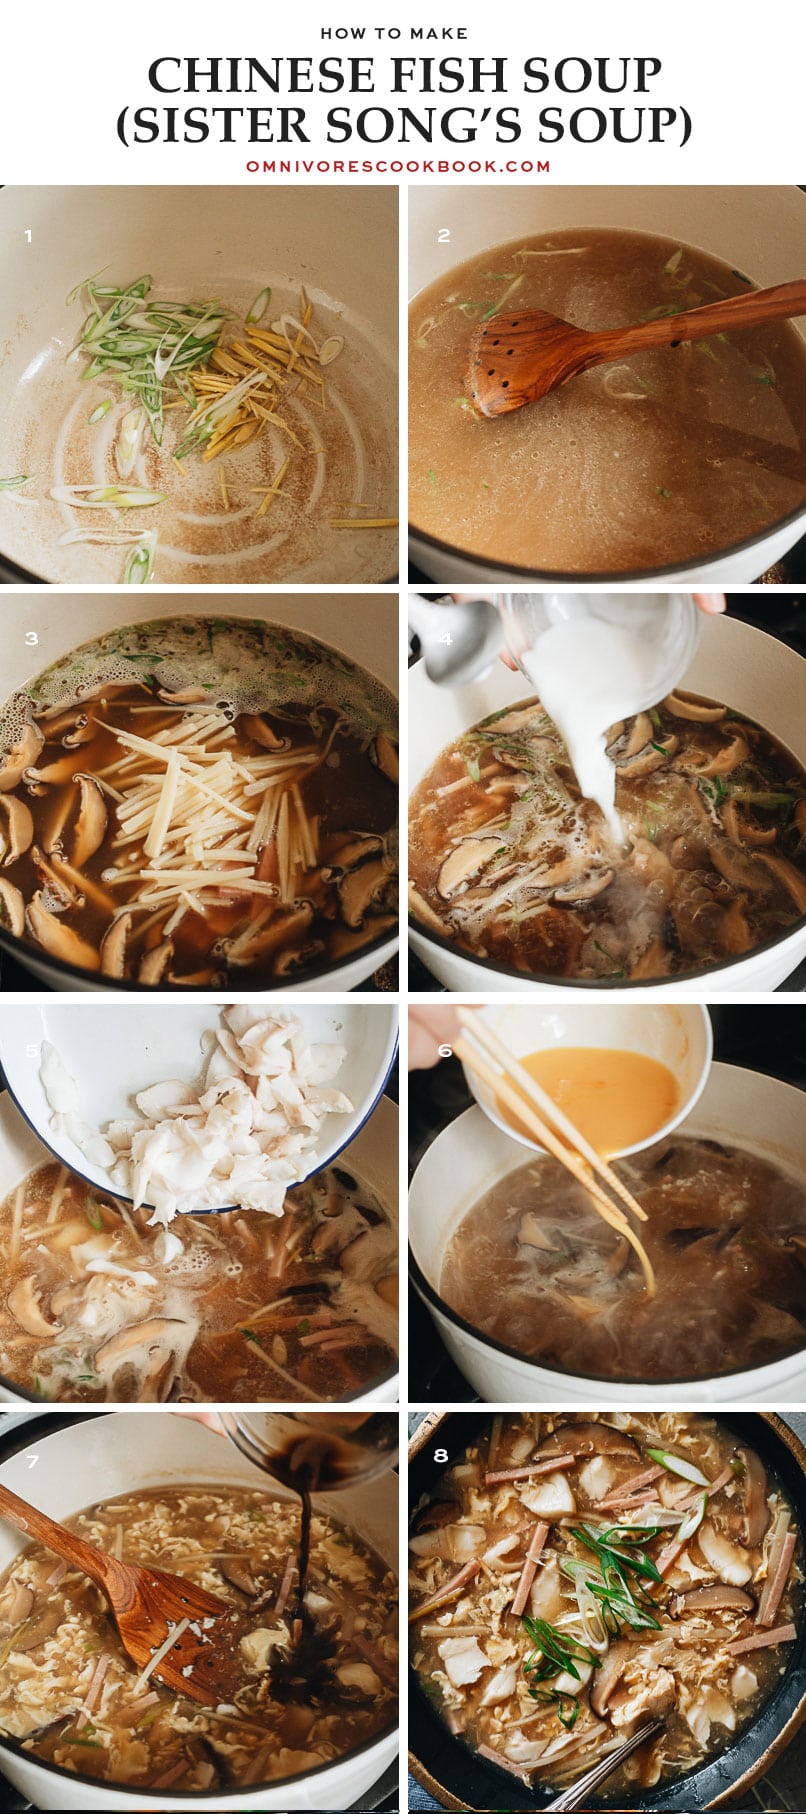 Step-by-step photos for preparing hot and sour fish soup